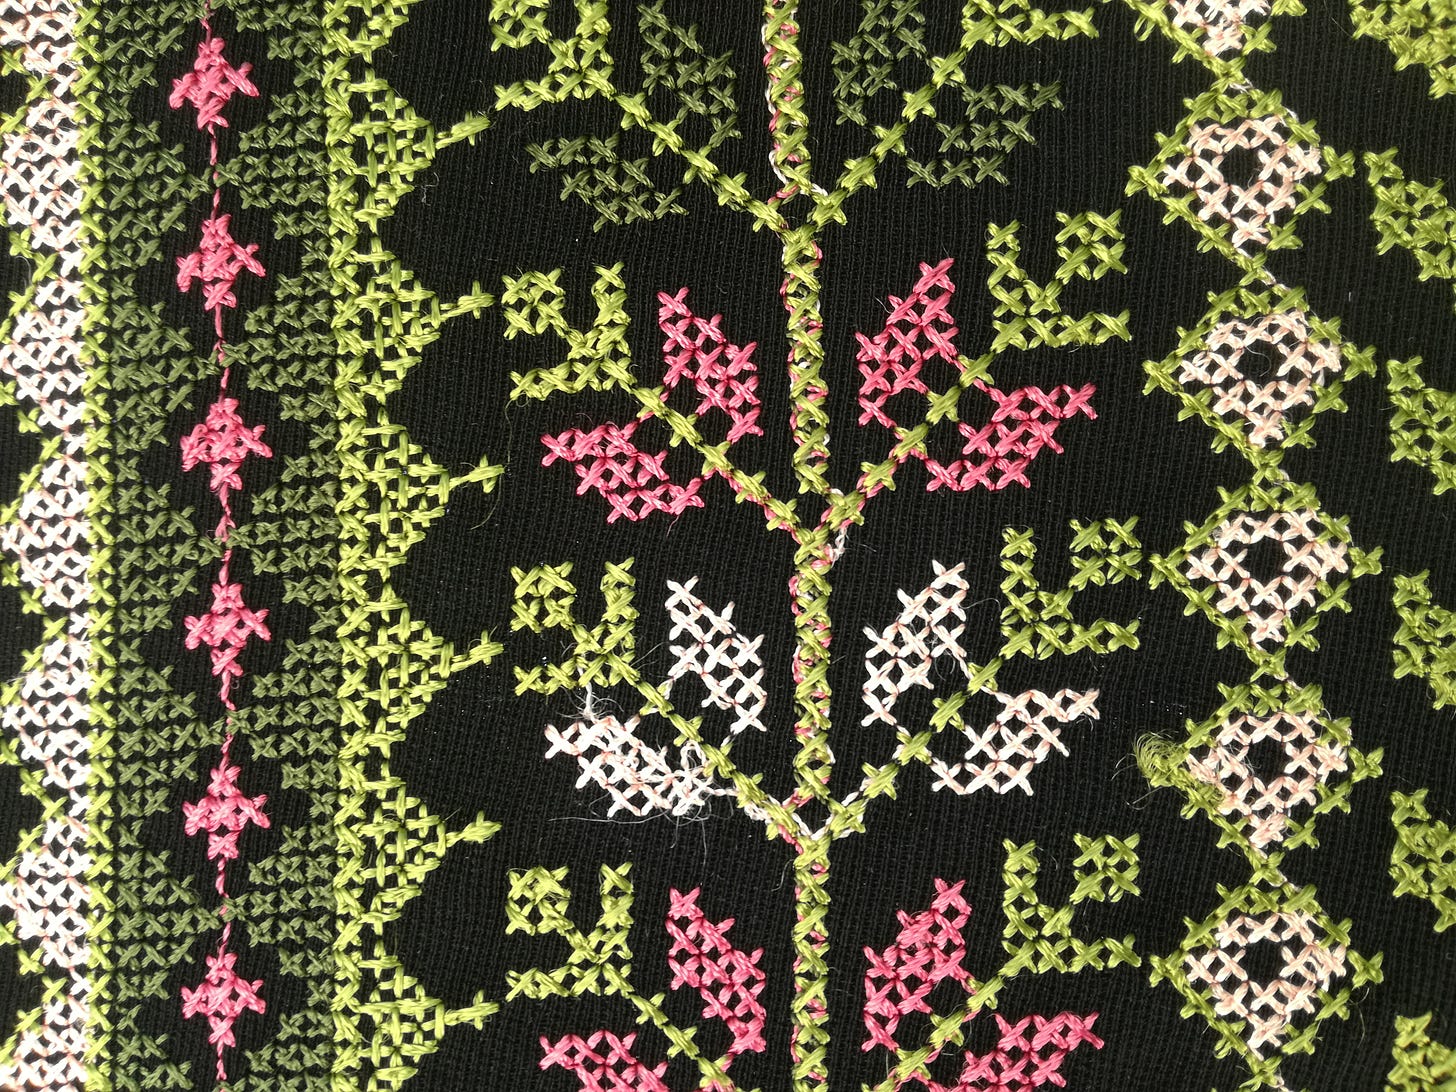 File:A hand Palestinian embroidery.jpg - Wikimedia Commons